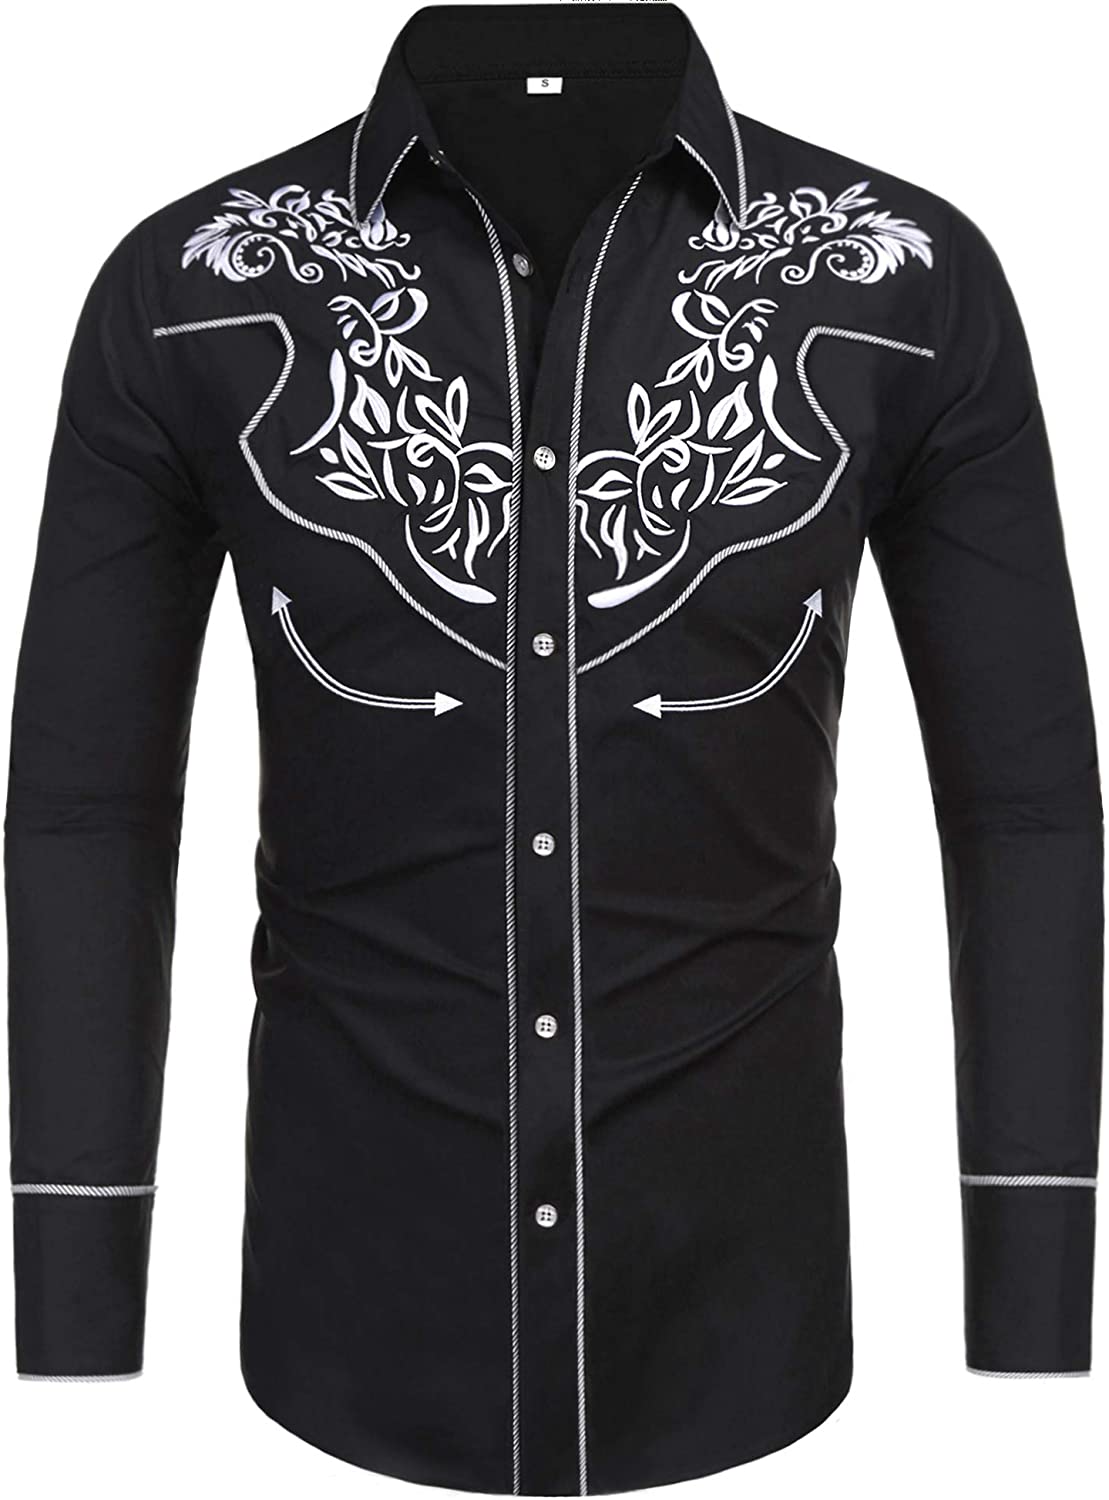 Daupanzees Men's Long Sleeve Embroidered Shirts Slim Fit Casual Button ...